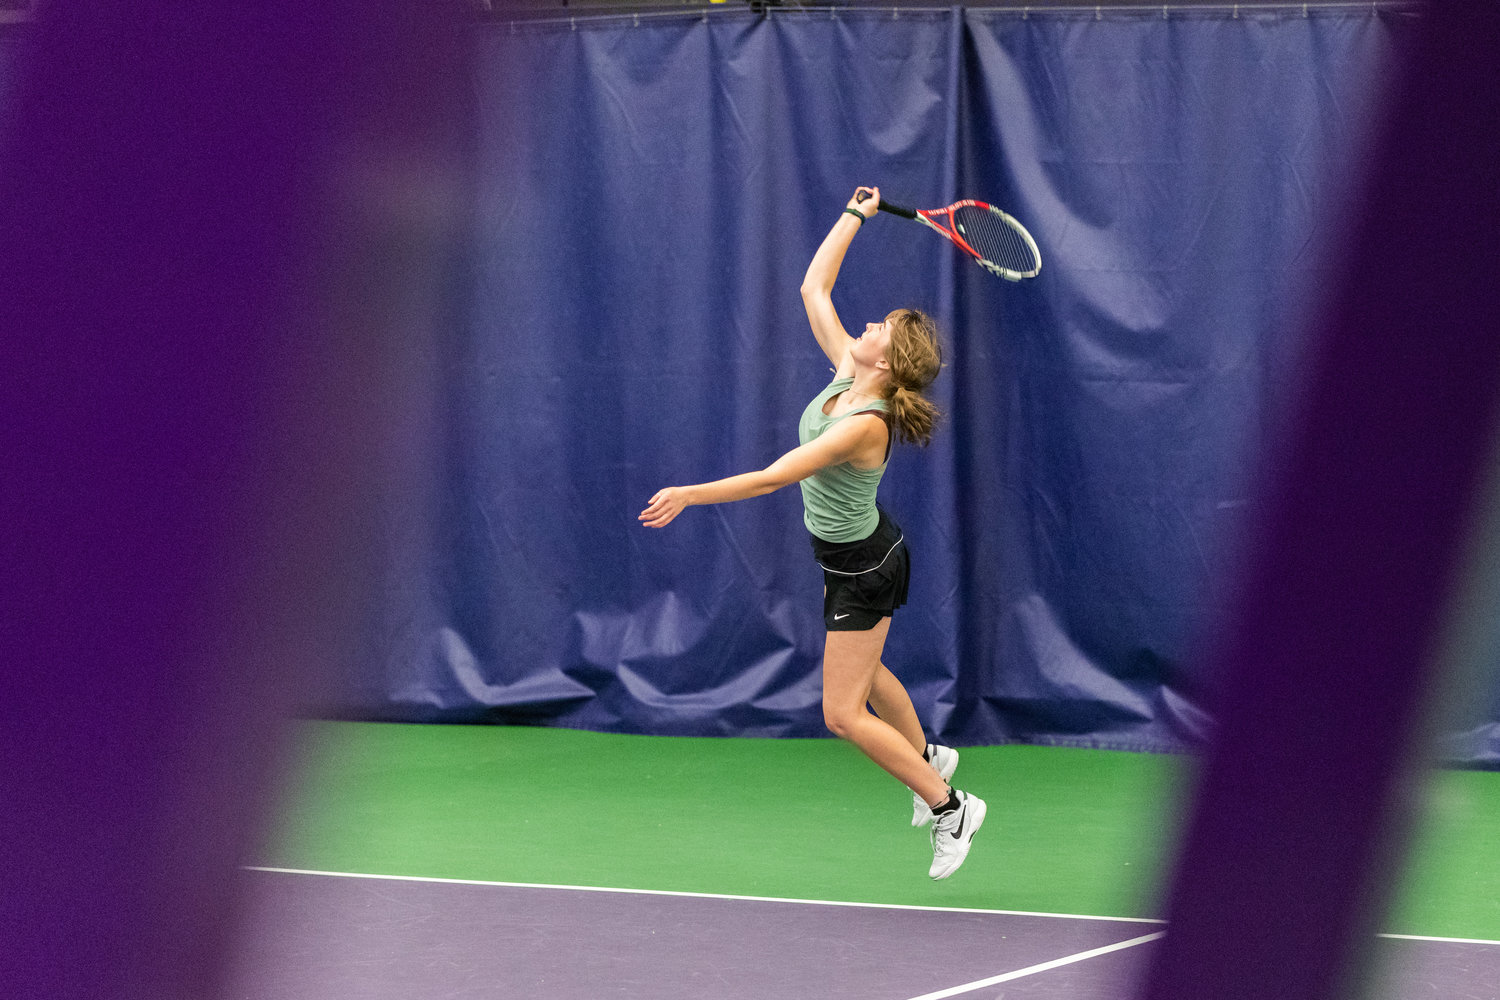 Centralia's Elizabeth Hopkins serves during the first set of the 2A girls' doubles tennis state competition on May 27, 2022.